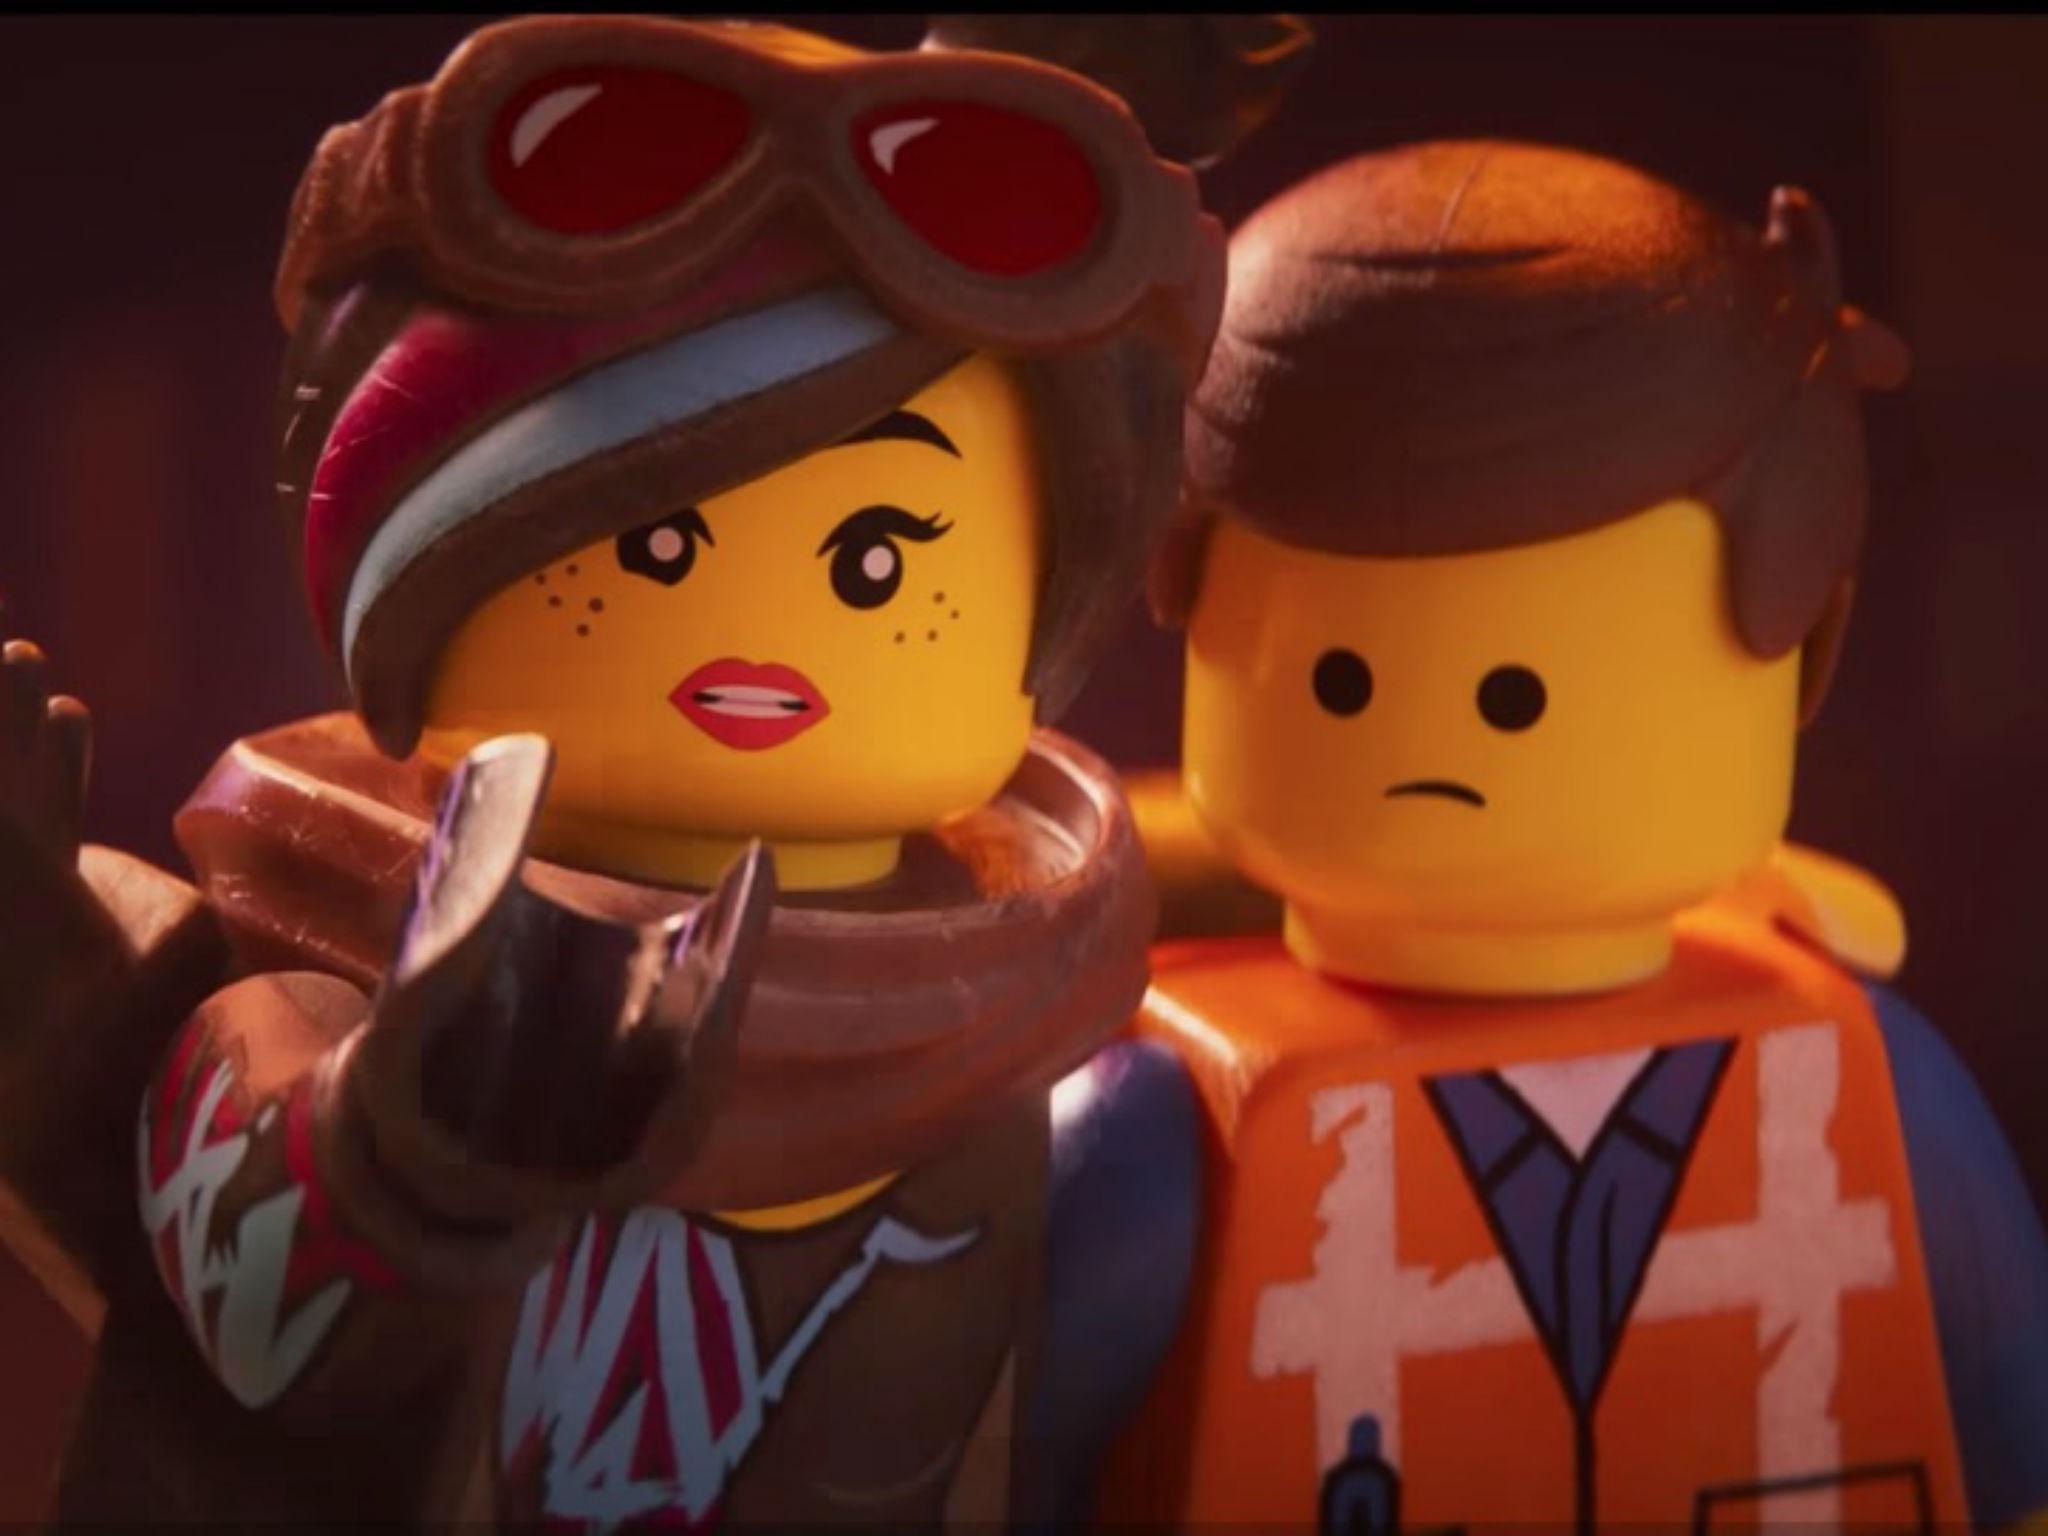 The new Lego Movie 2 trailer has been released everything is